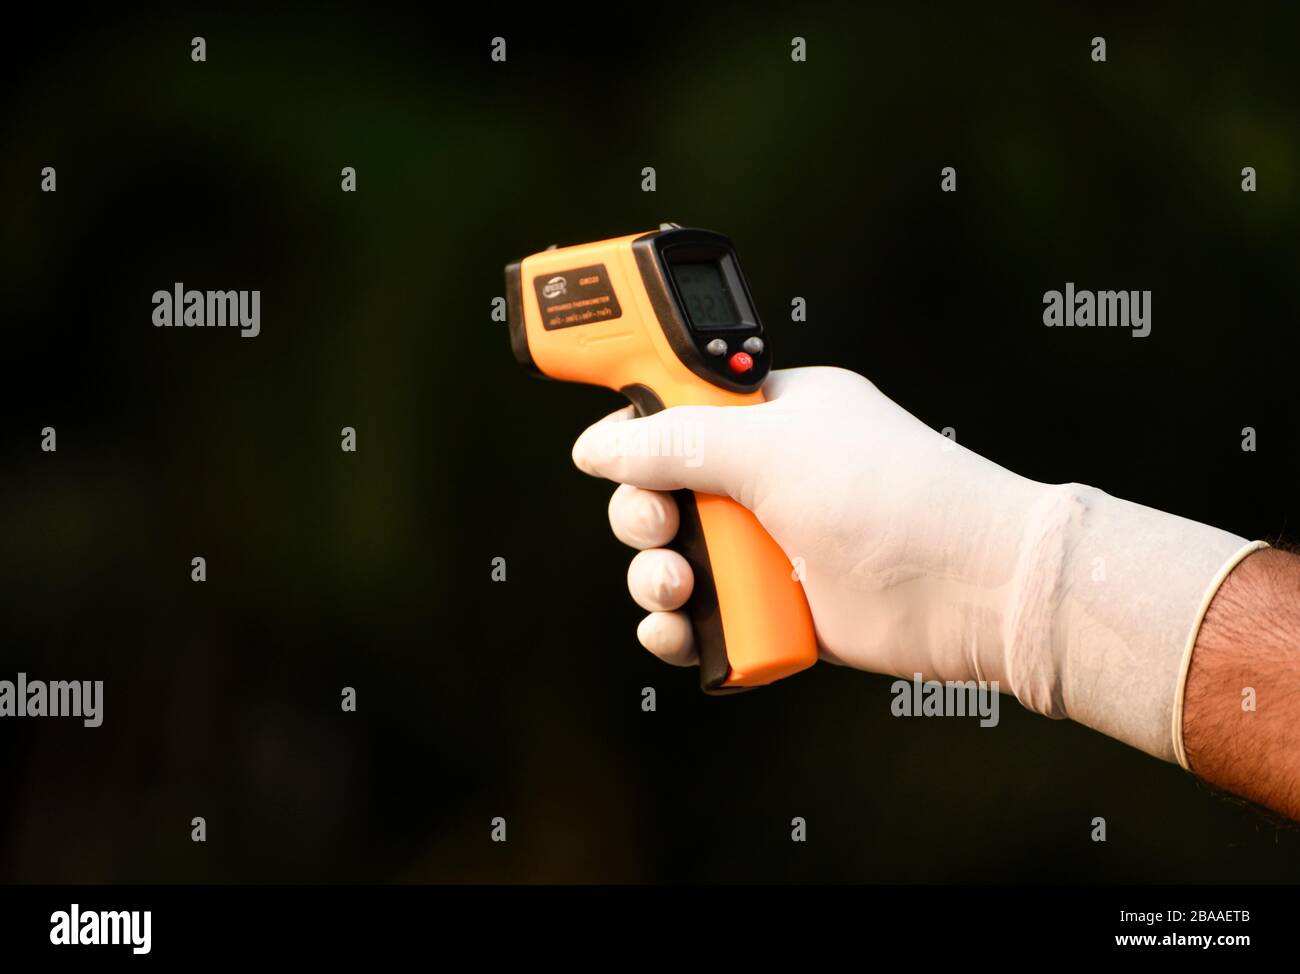 Guwahati, Assam, India. 26th Mar, 2020. Police personnel thermal screening a person before entering to Governor House to spray disinfectant, in Guwahati. Credit: David Talukdar/ZUMA Wire/Alamy Live News Stock Photo